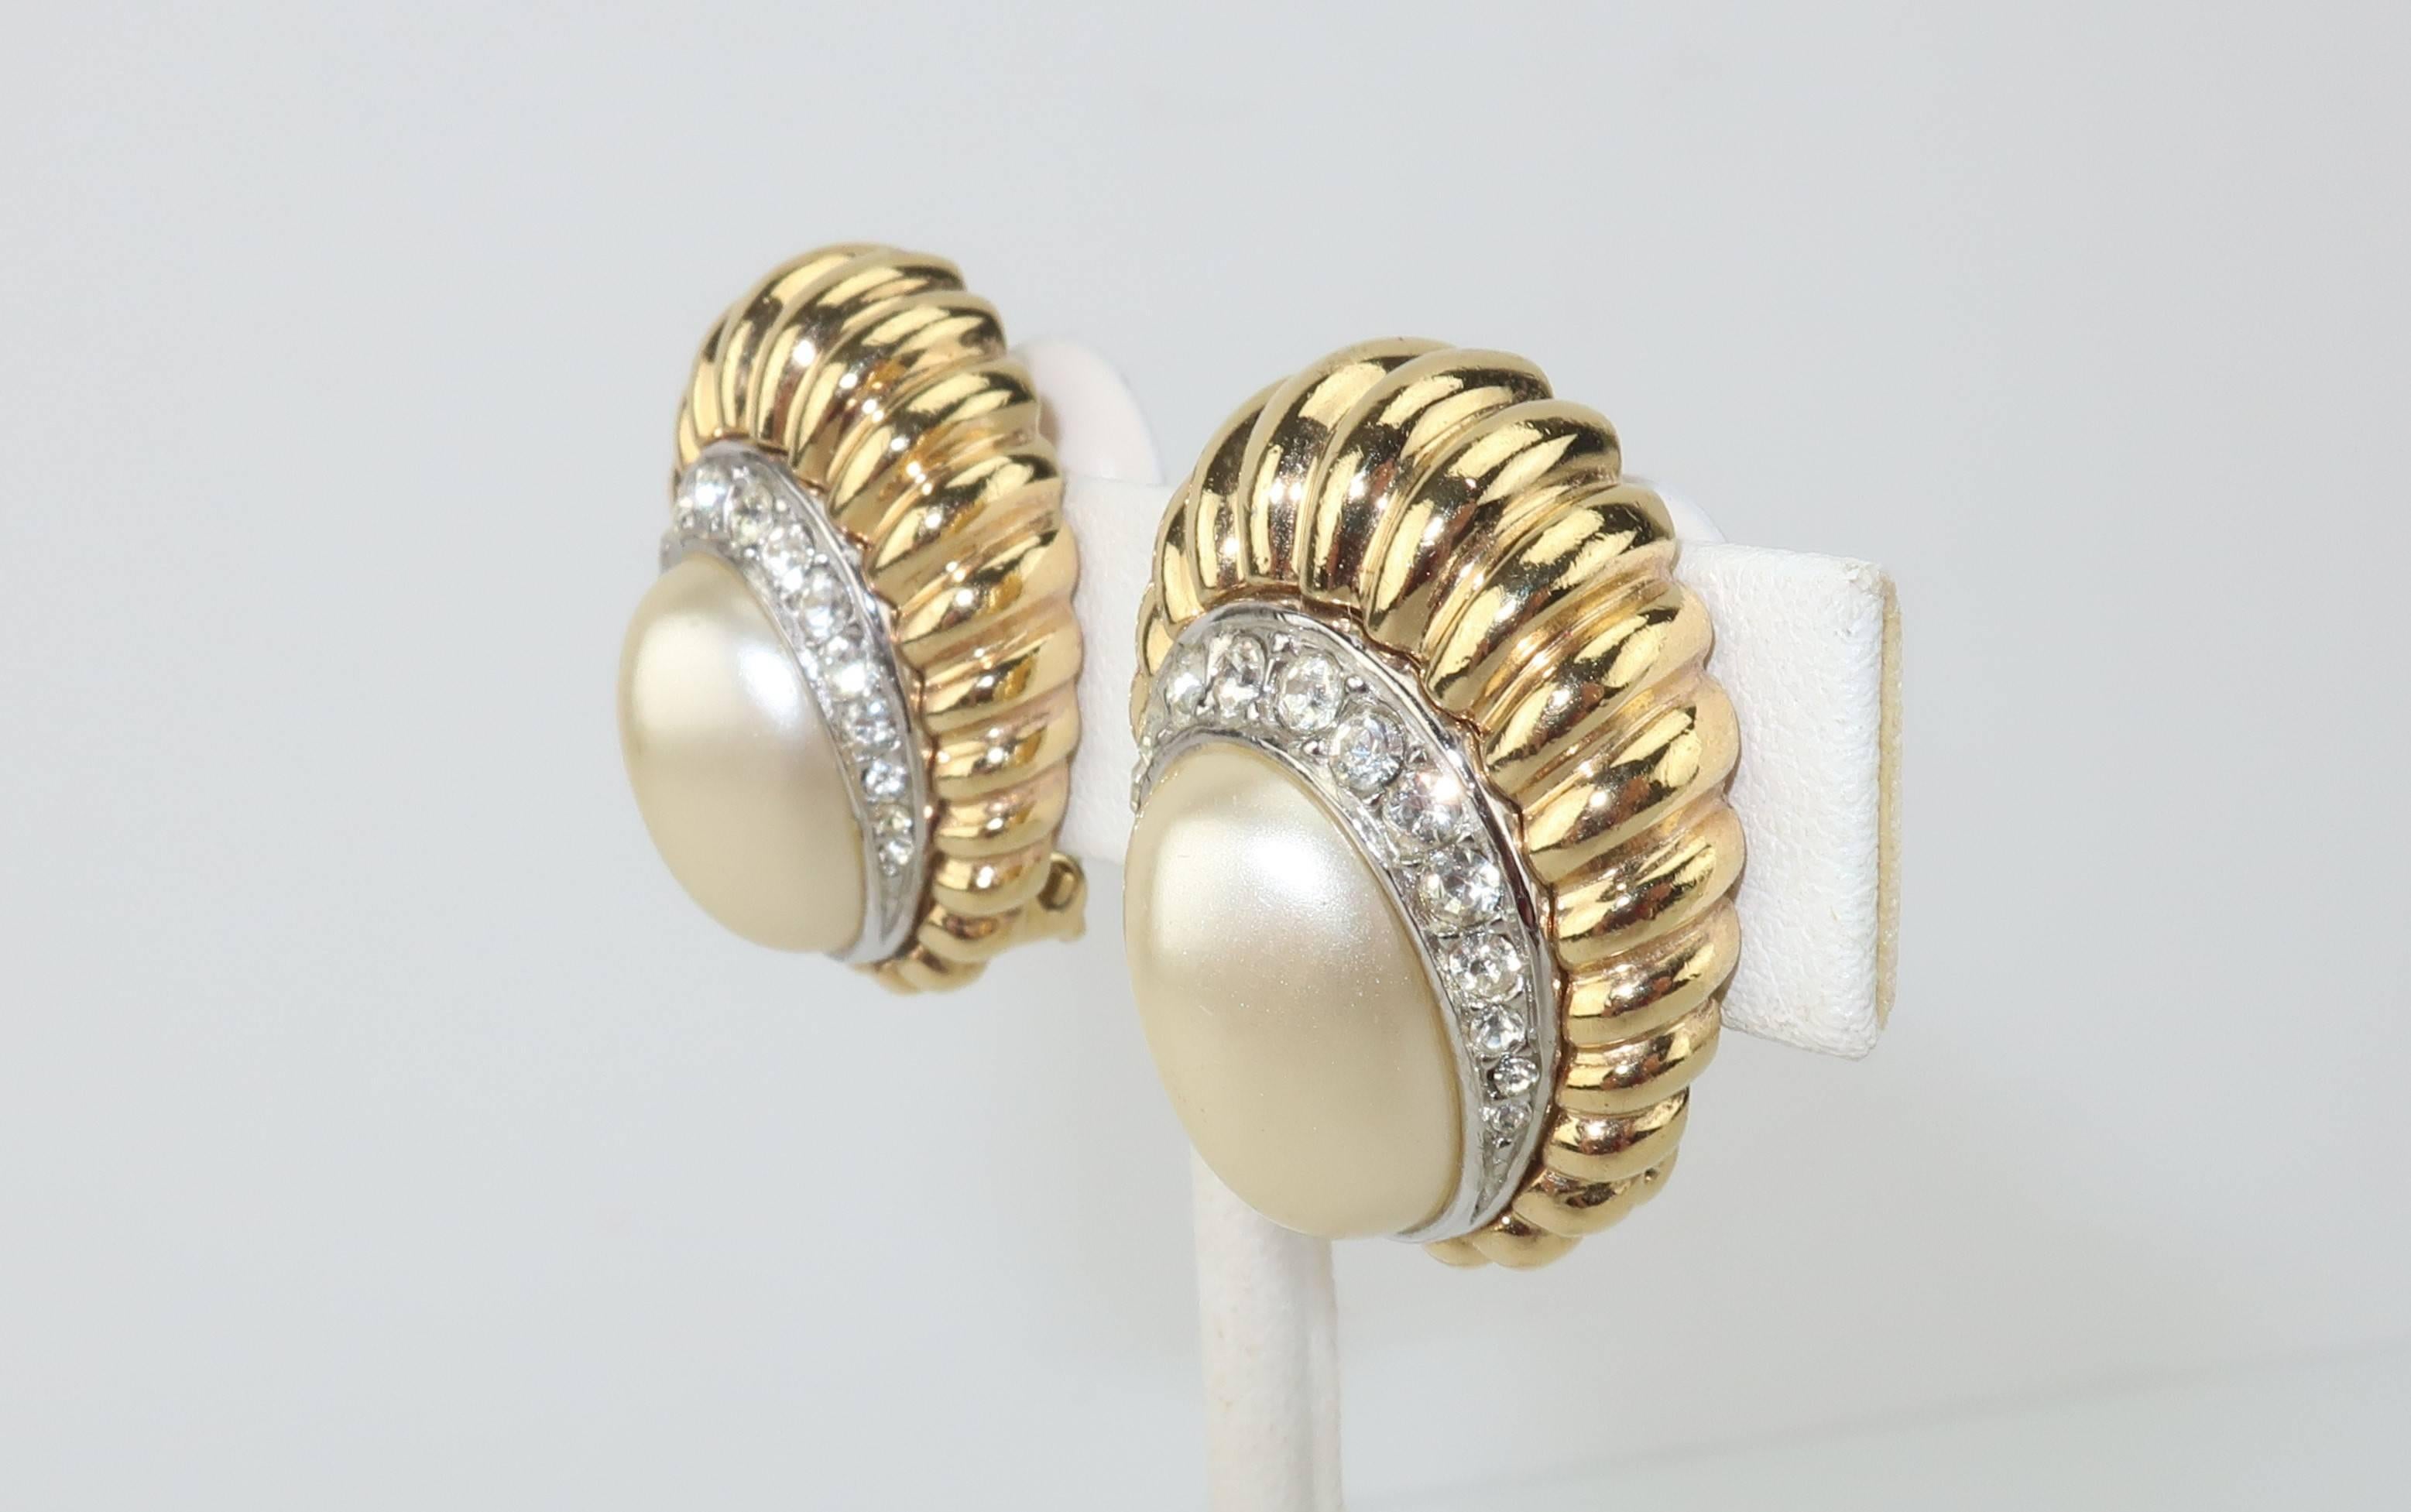 Baroque Revival 1980's Ciner Faux Pearl & Rhinestone Gold Tone Clip On Earrings